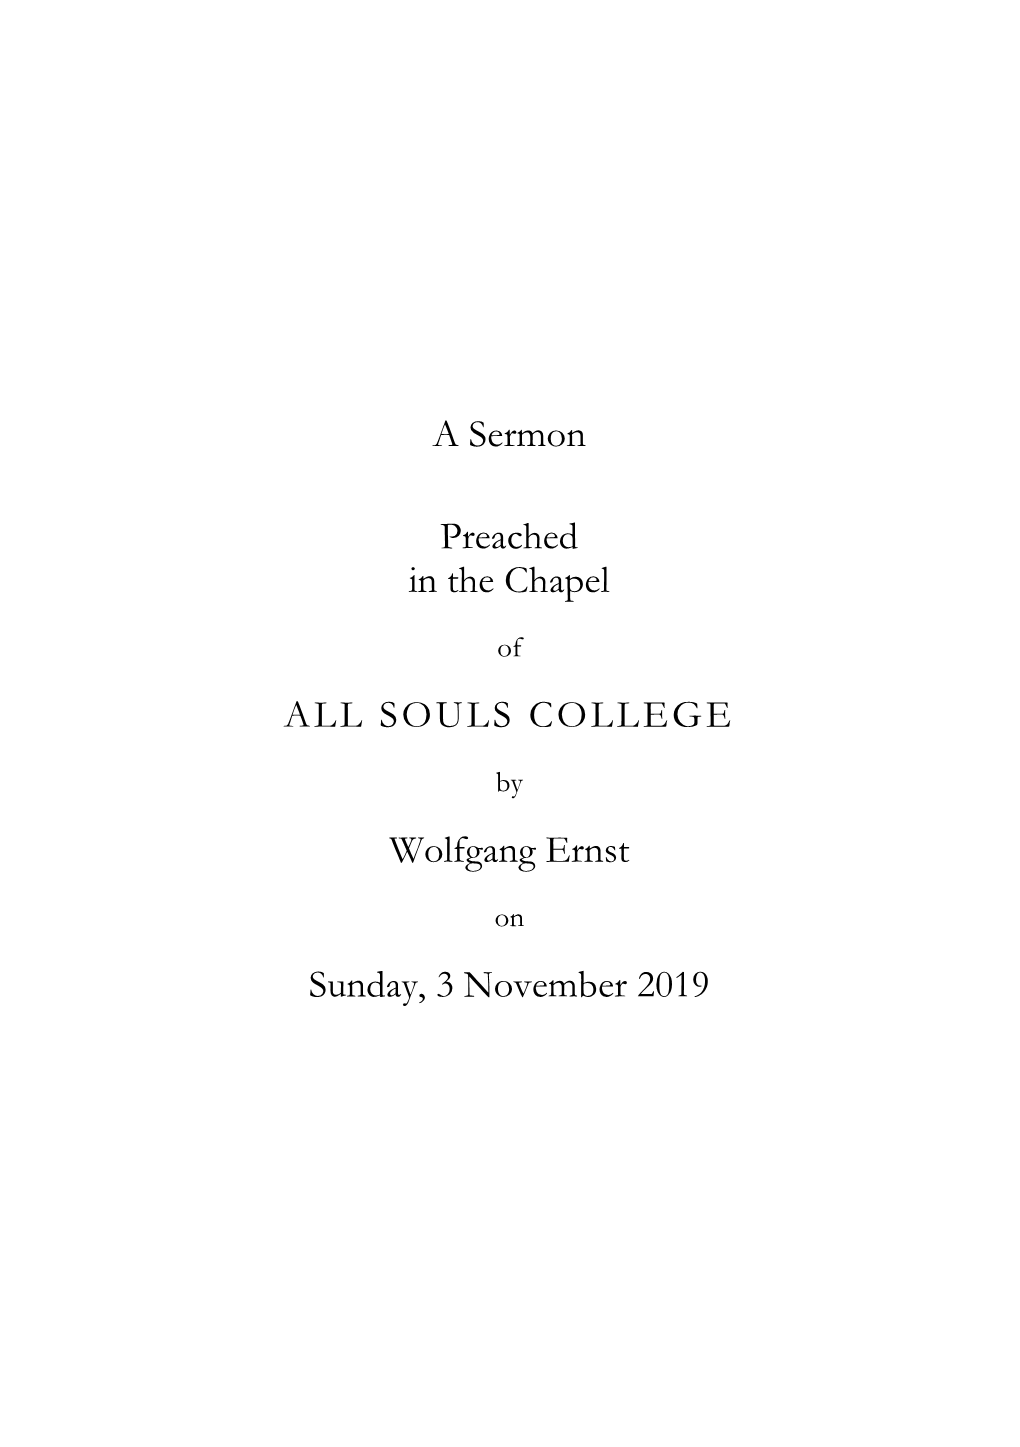 A Sermon Preached in the Chapel ALL SOULS COLLEGE Wolfgang